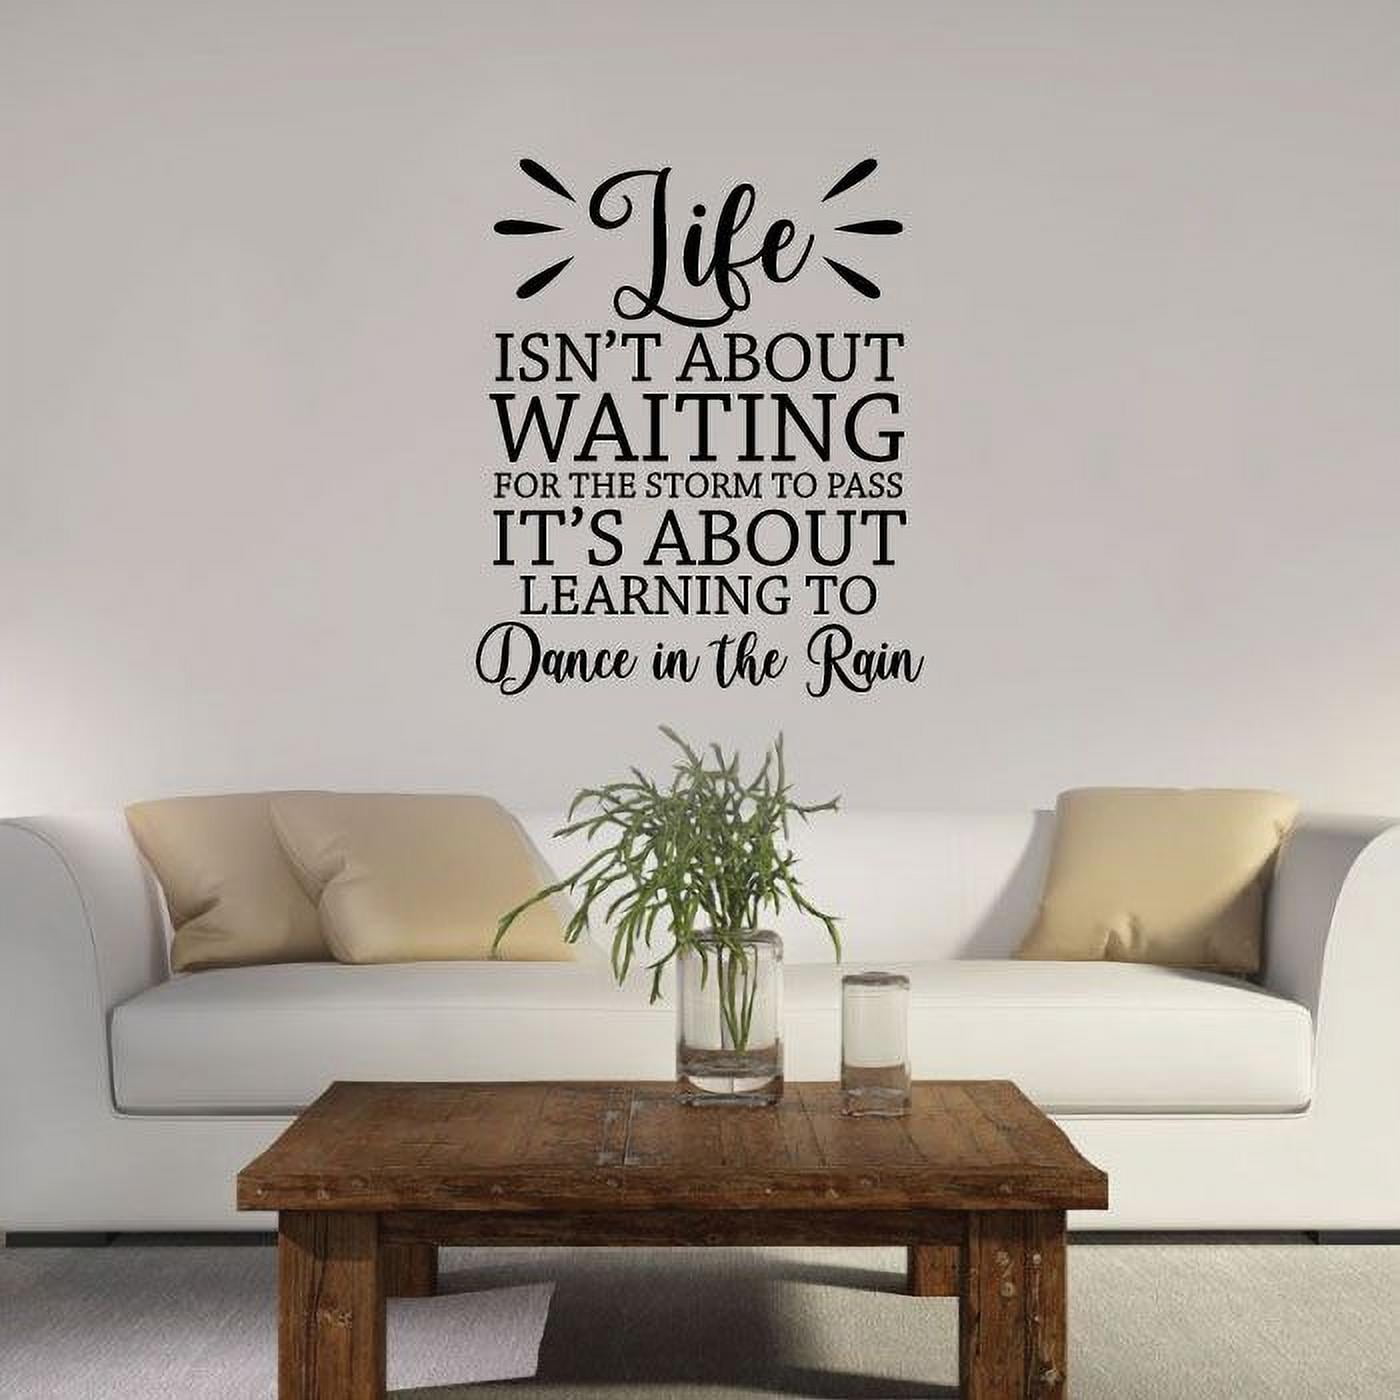 Its About Learning To Dance In The Rain - Motivational Quote Vinyl ...